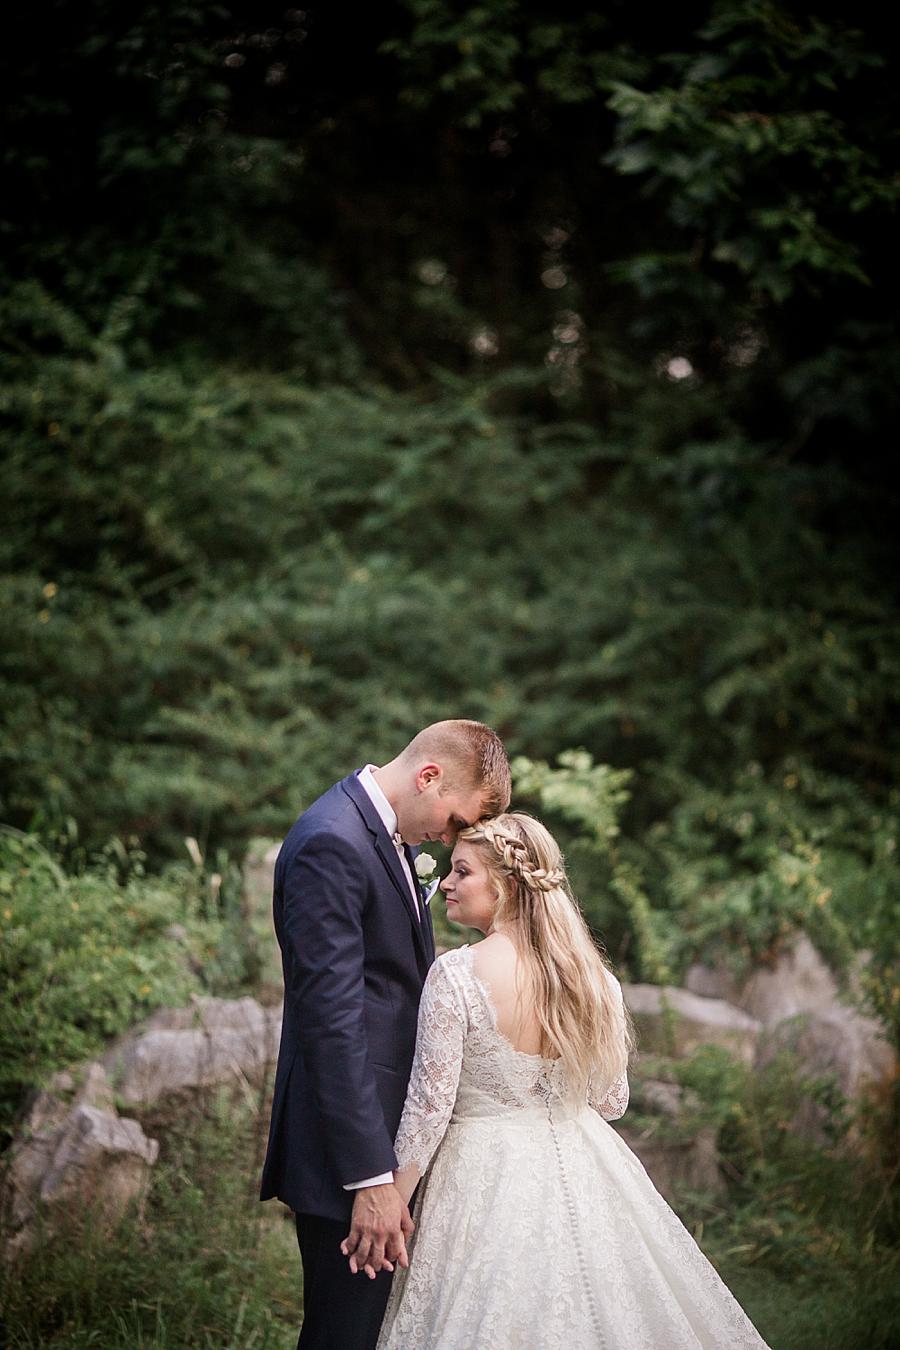 Forehead to forehead at this Cheval Manor Wedding by Knoxville Wedding Photographer, Amanda May Photos.